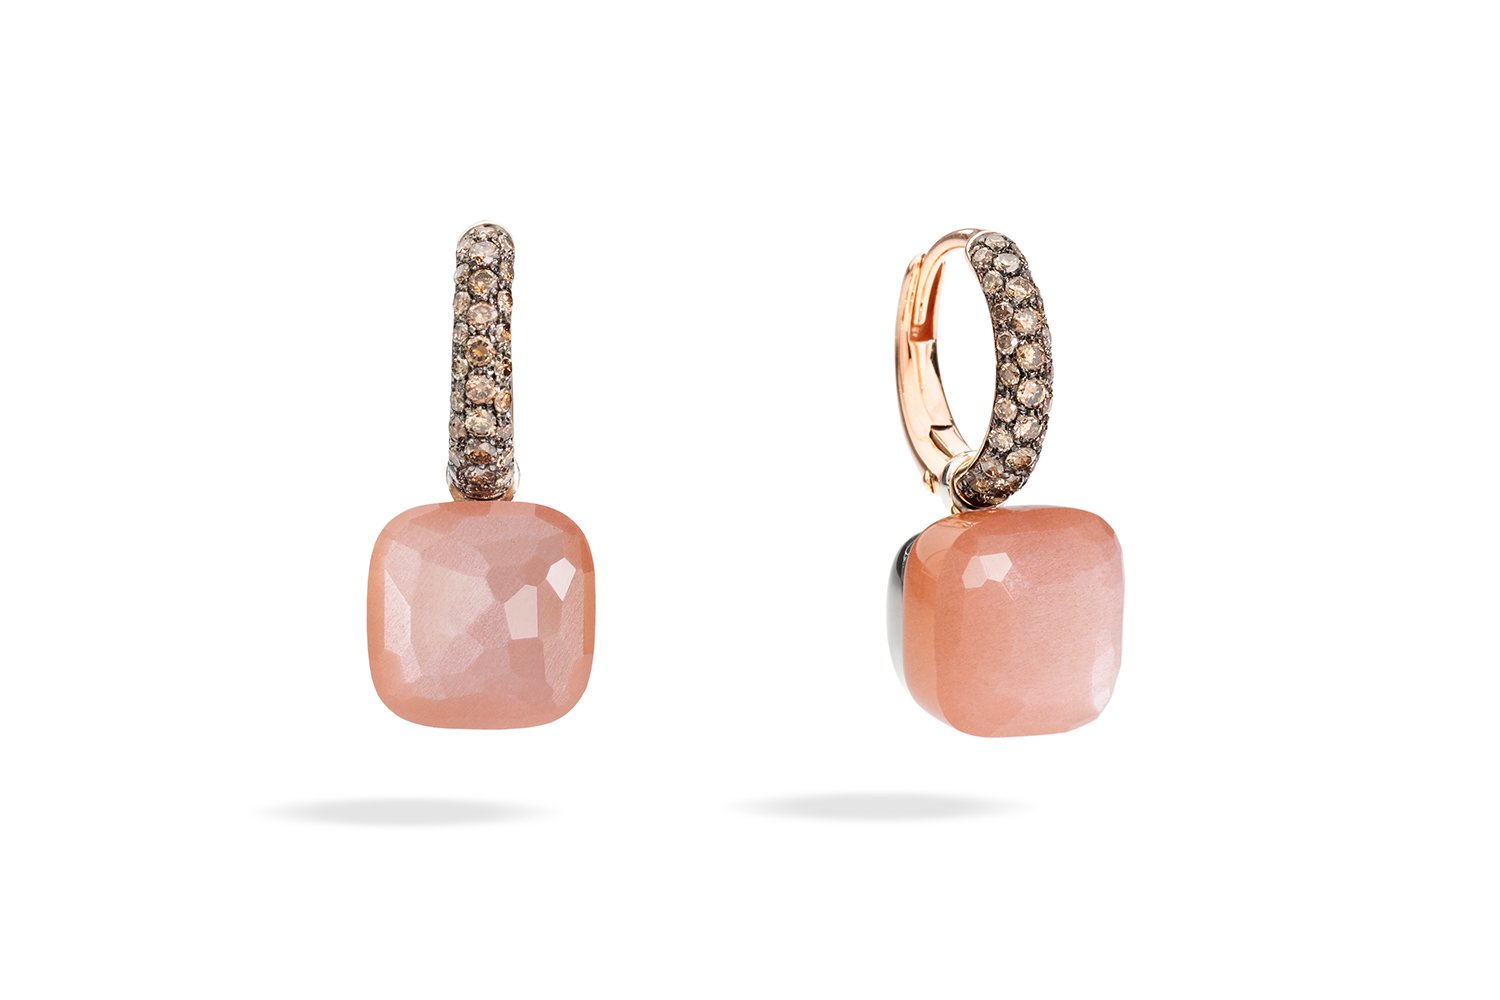 NUDO-CHOCOLATE-earrings-in-rose-gold-with-orange-moonstone-and-brown-diamonds-by-Pomellato-–-kopia